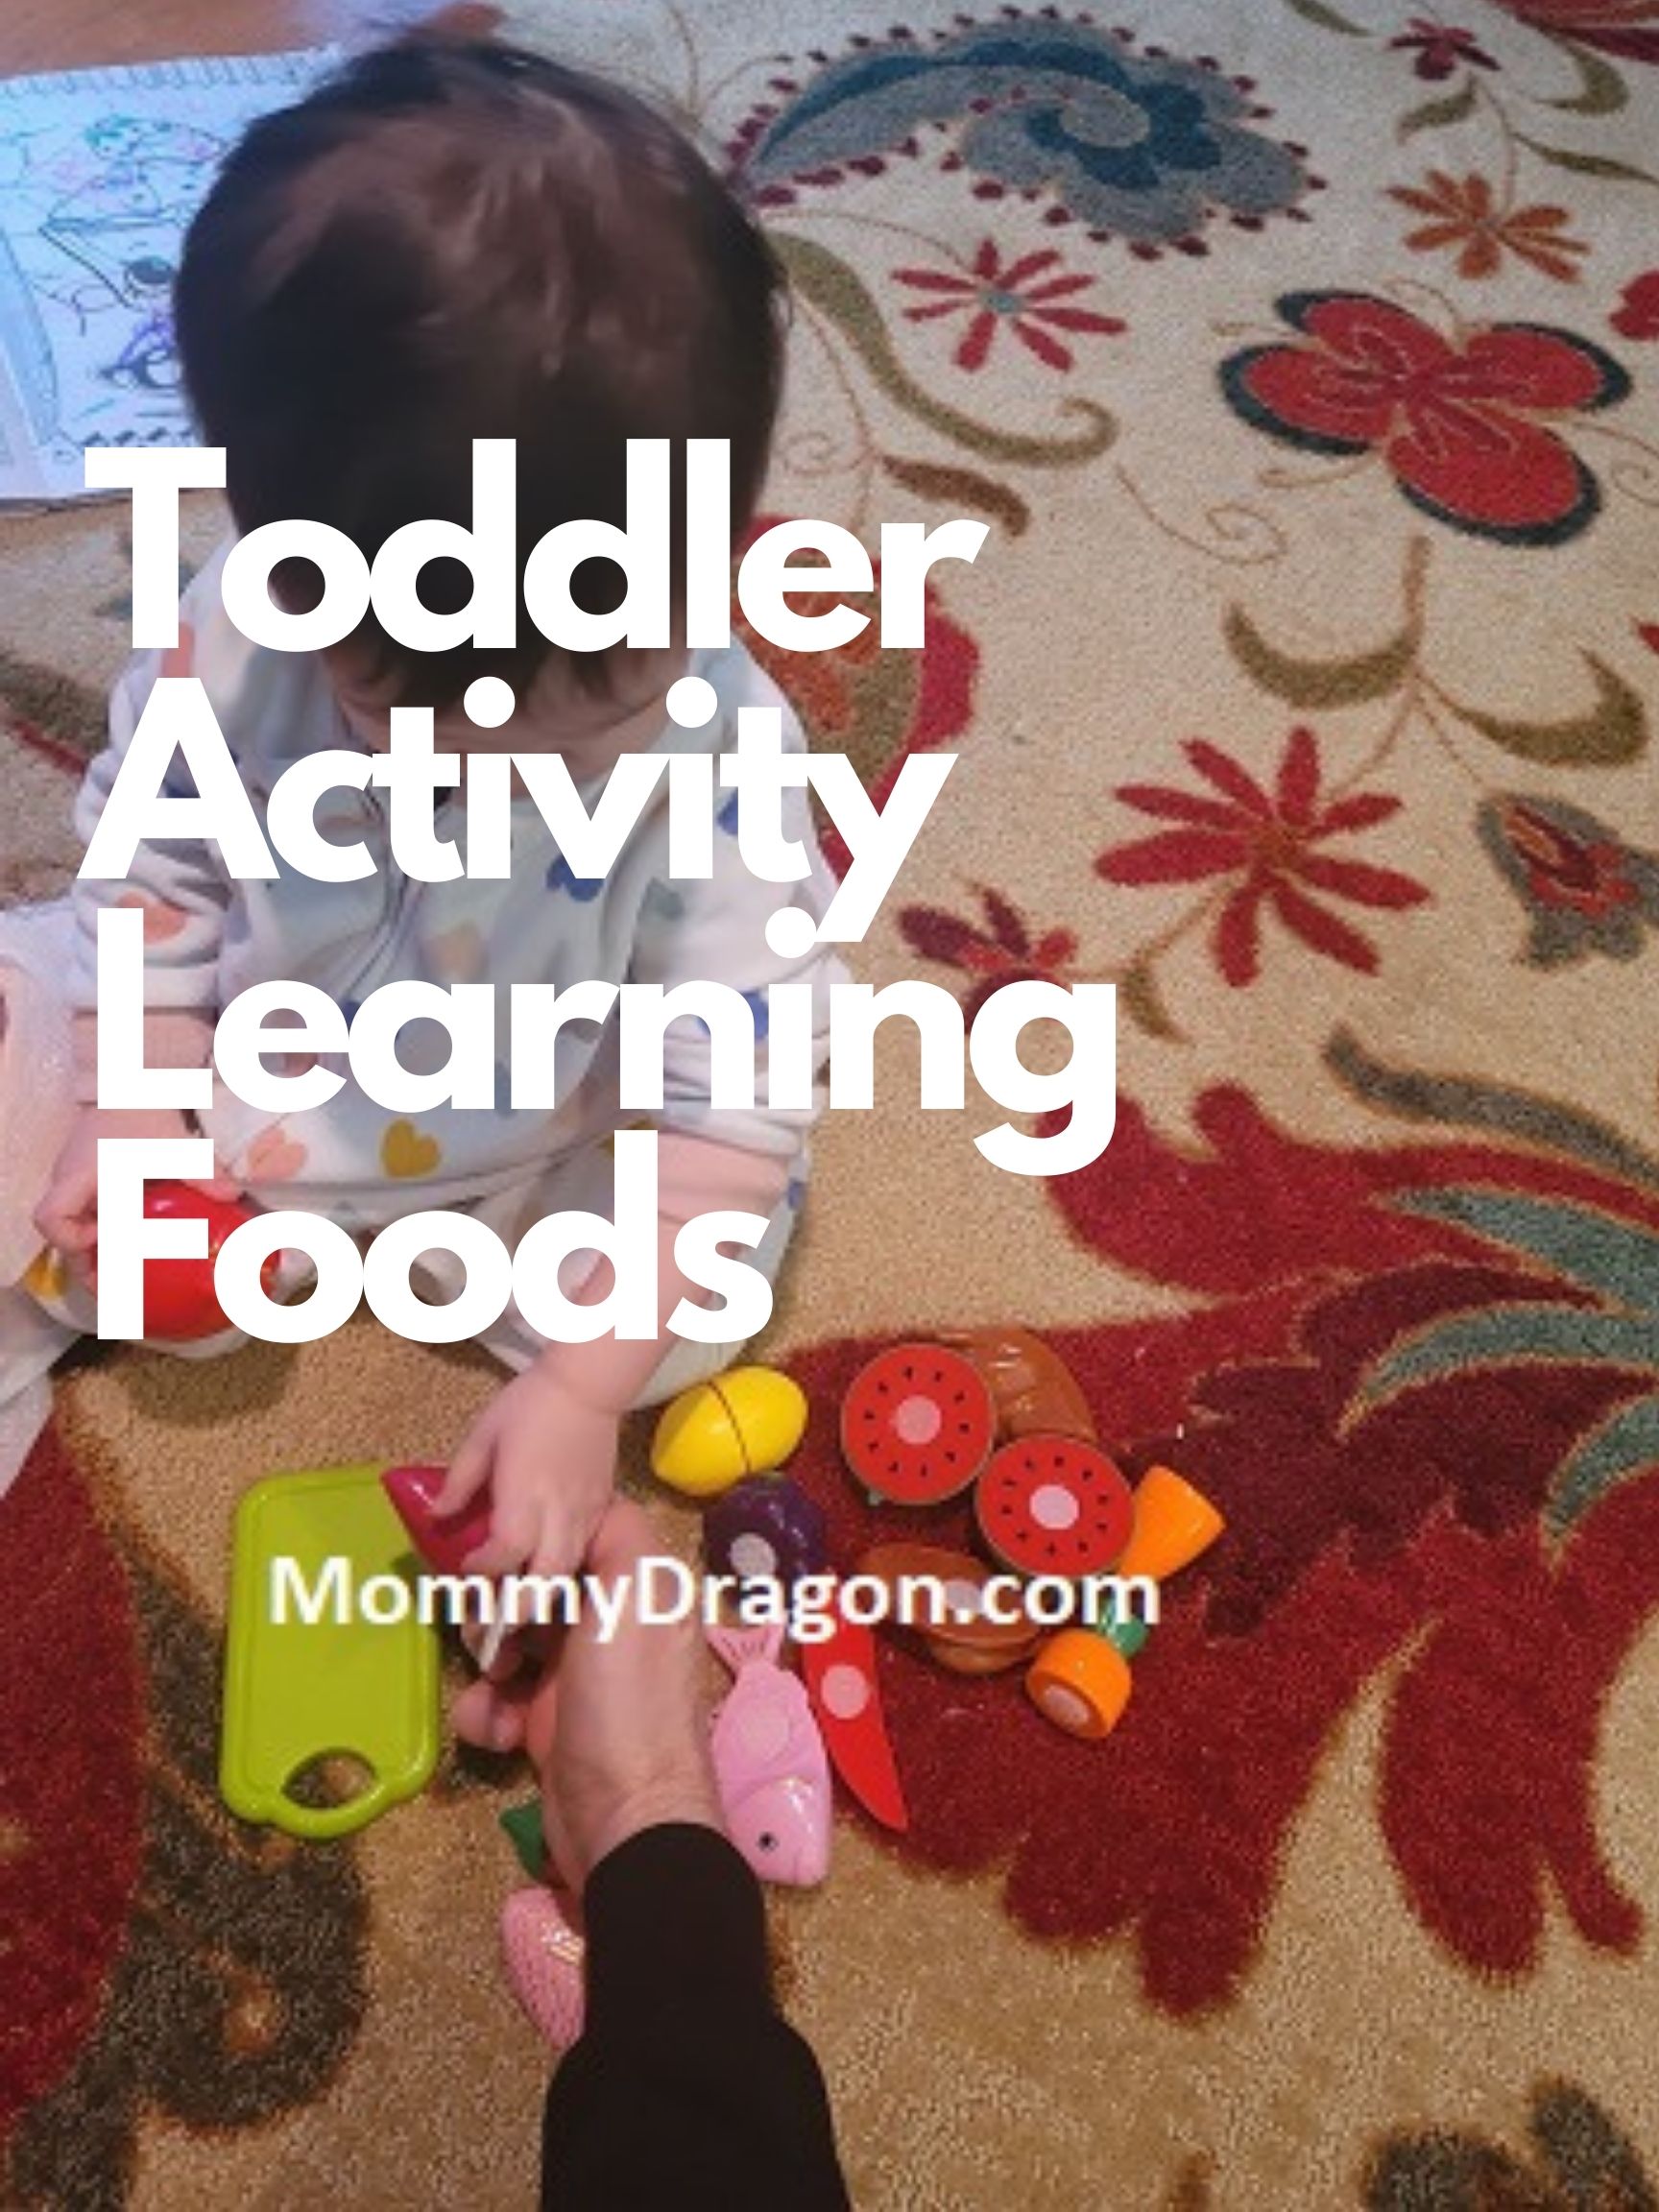 Toddler Meal Ideas - Asian Baby Mom